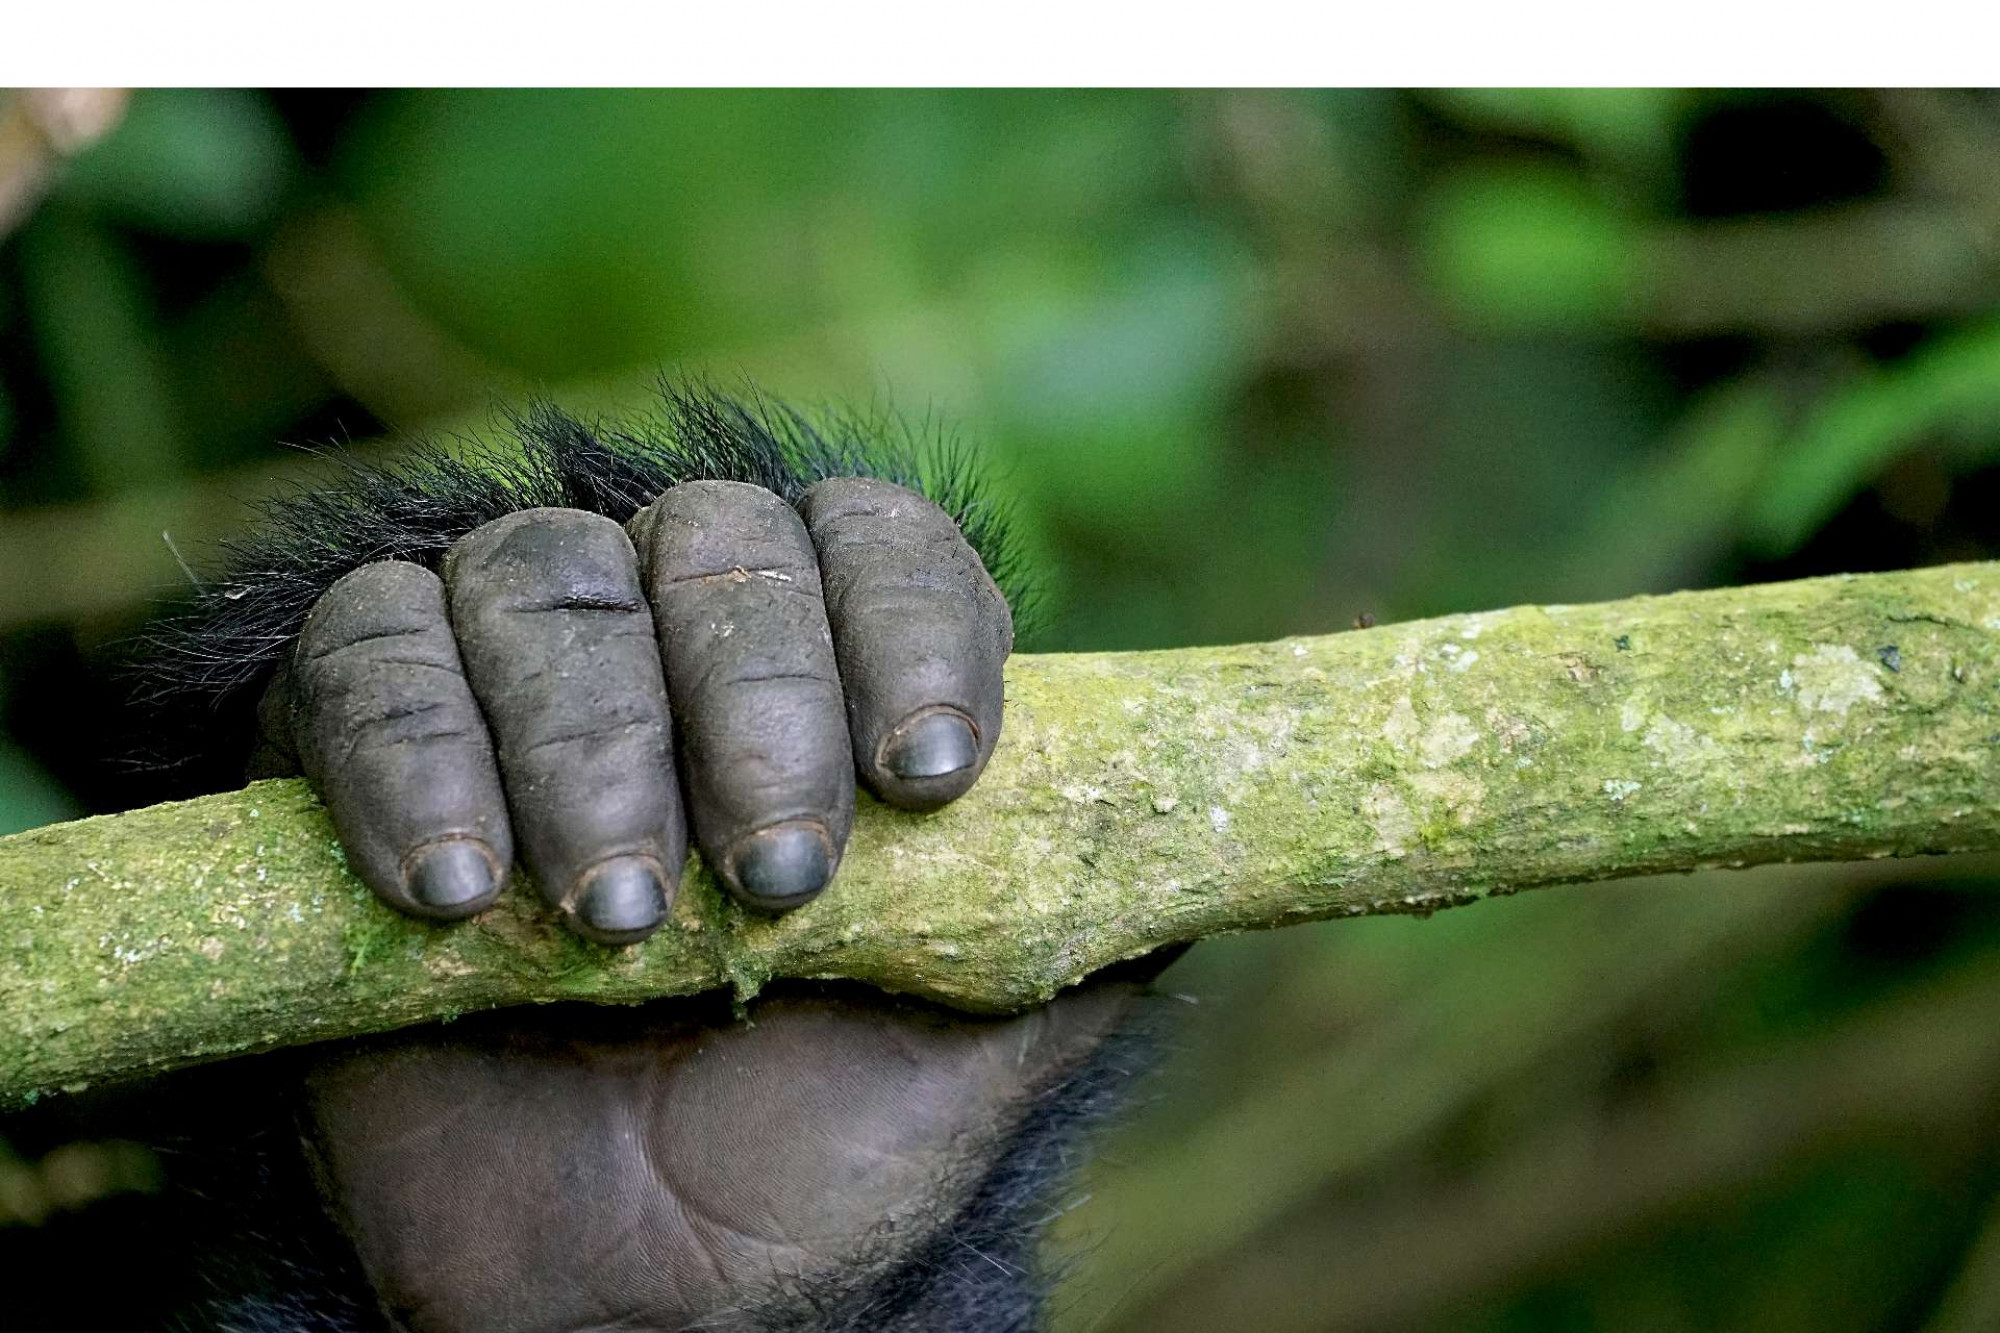 Close-up of gorilla's fingers gripping a tree branch